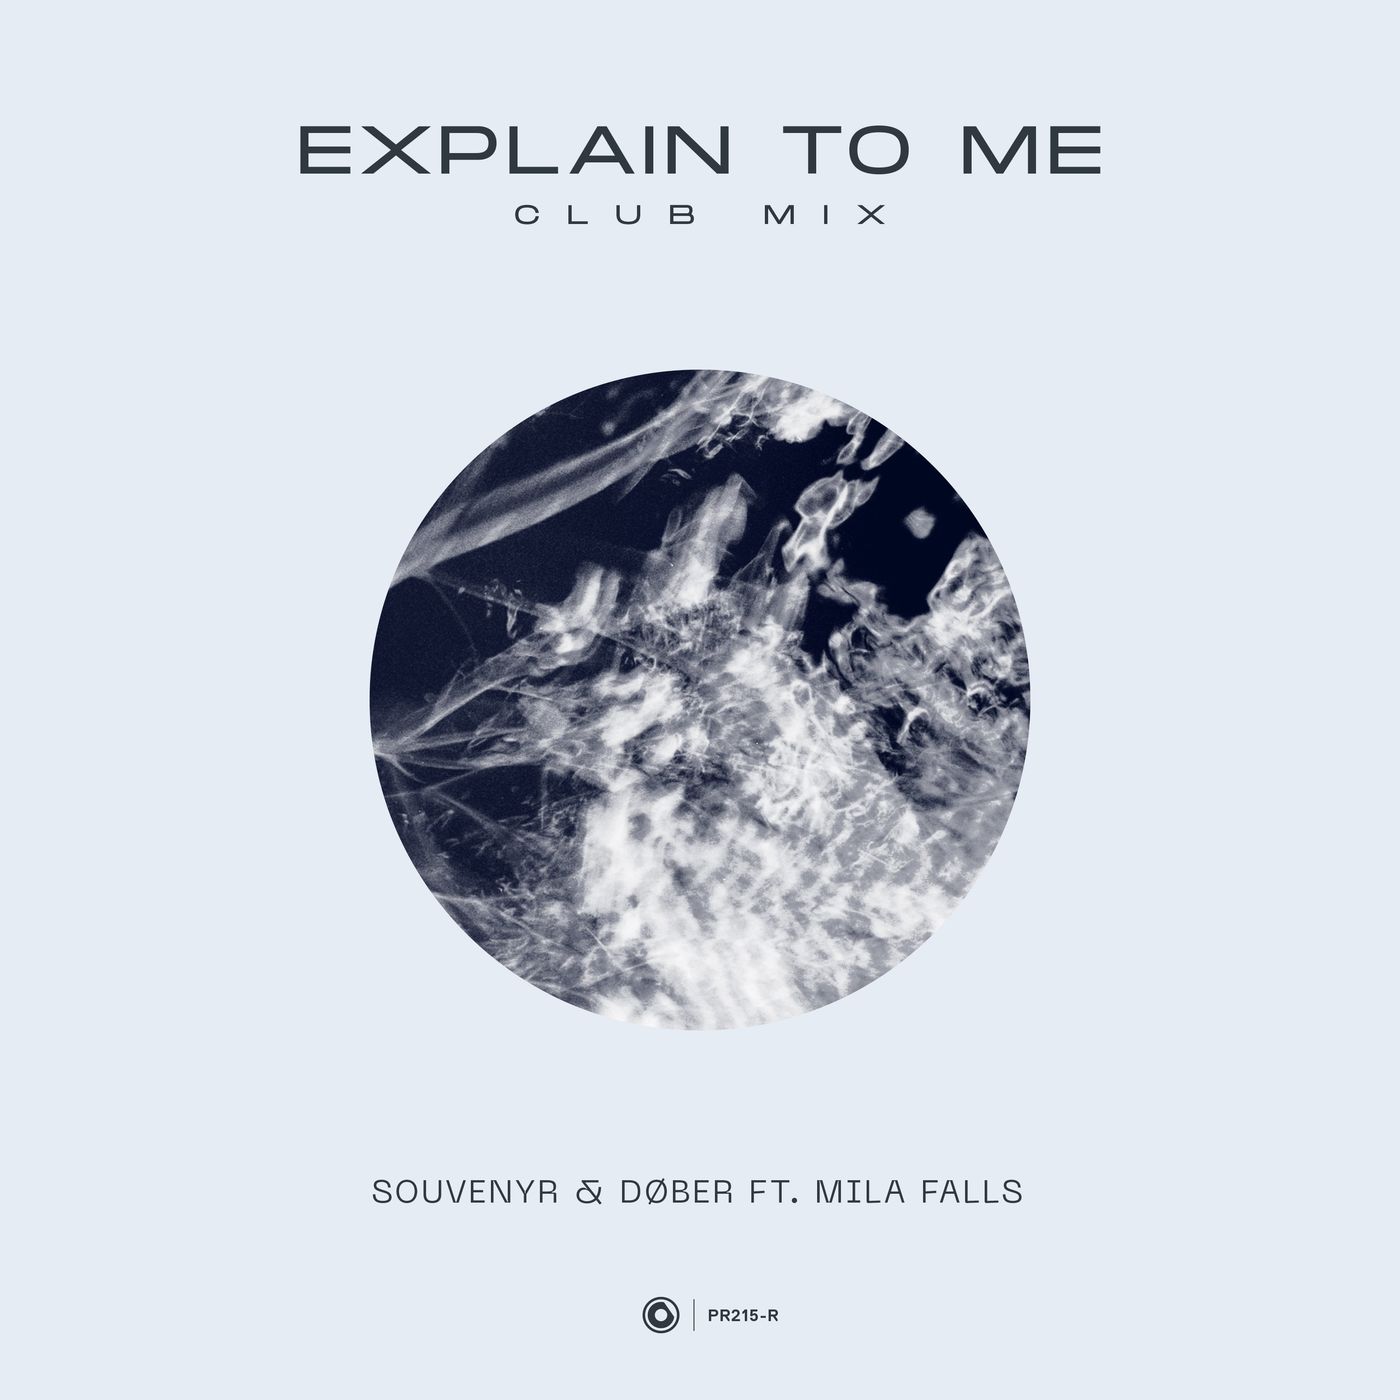 Souvenyr And DØber, Mila Falls - Explain To Me (extended Club Mix) on Revolution Radio